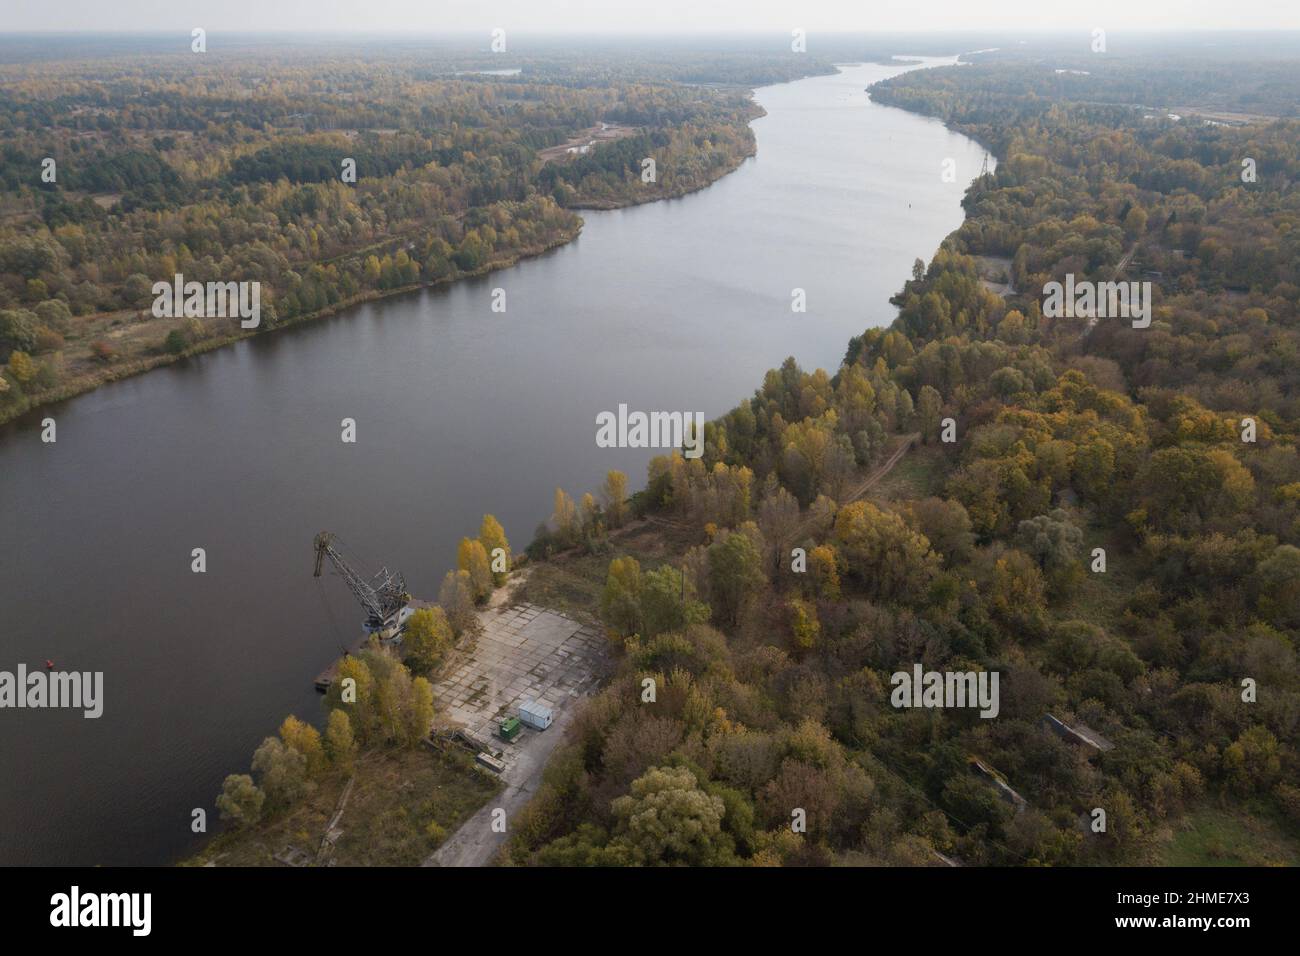 Aerial views of the Pripyat River and the surrounding forest from Chernobyl, Ukraine, near the Chernobyl Nuclear Power Plant. Stock Photo